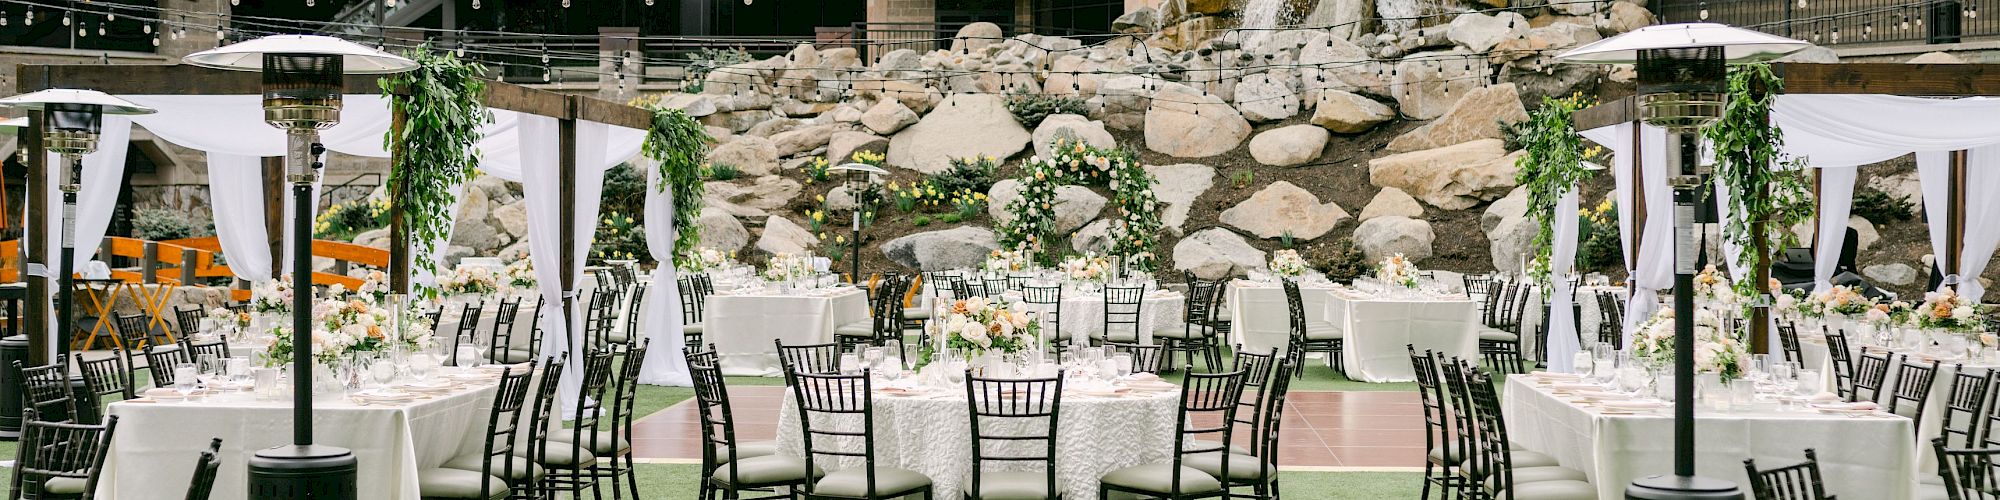 An elegant outdoor event setup with round tables and chairs arranged on a grassy area, surrounded by a backdrop of a building and waterfall.